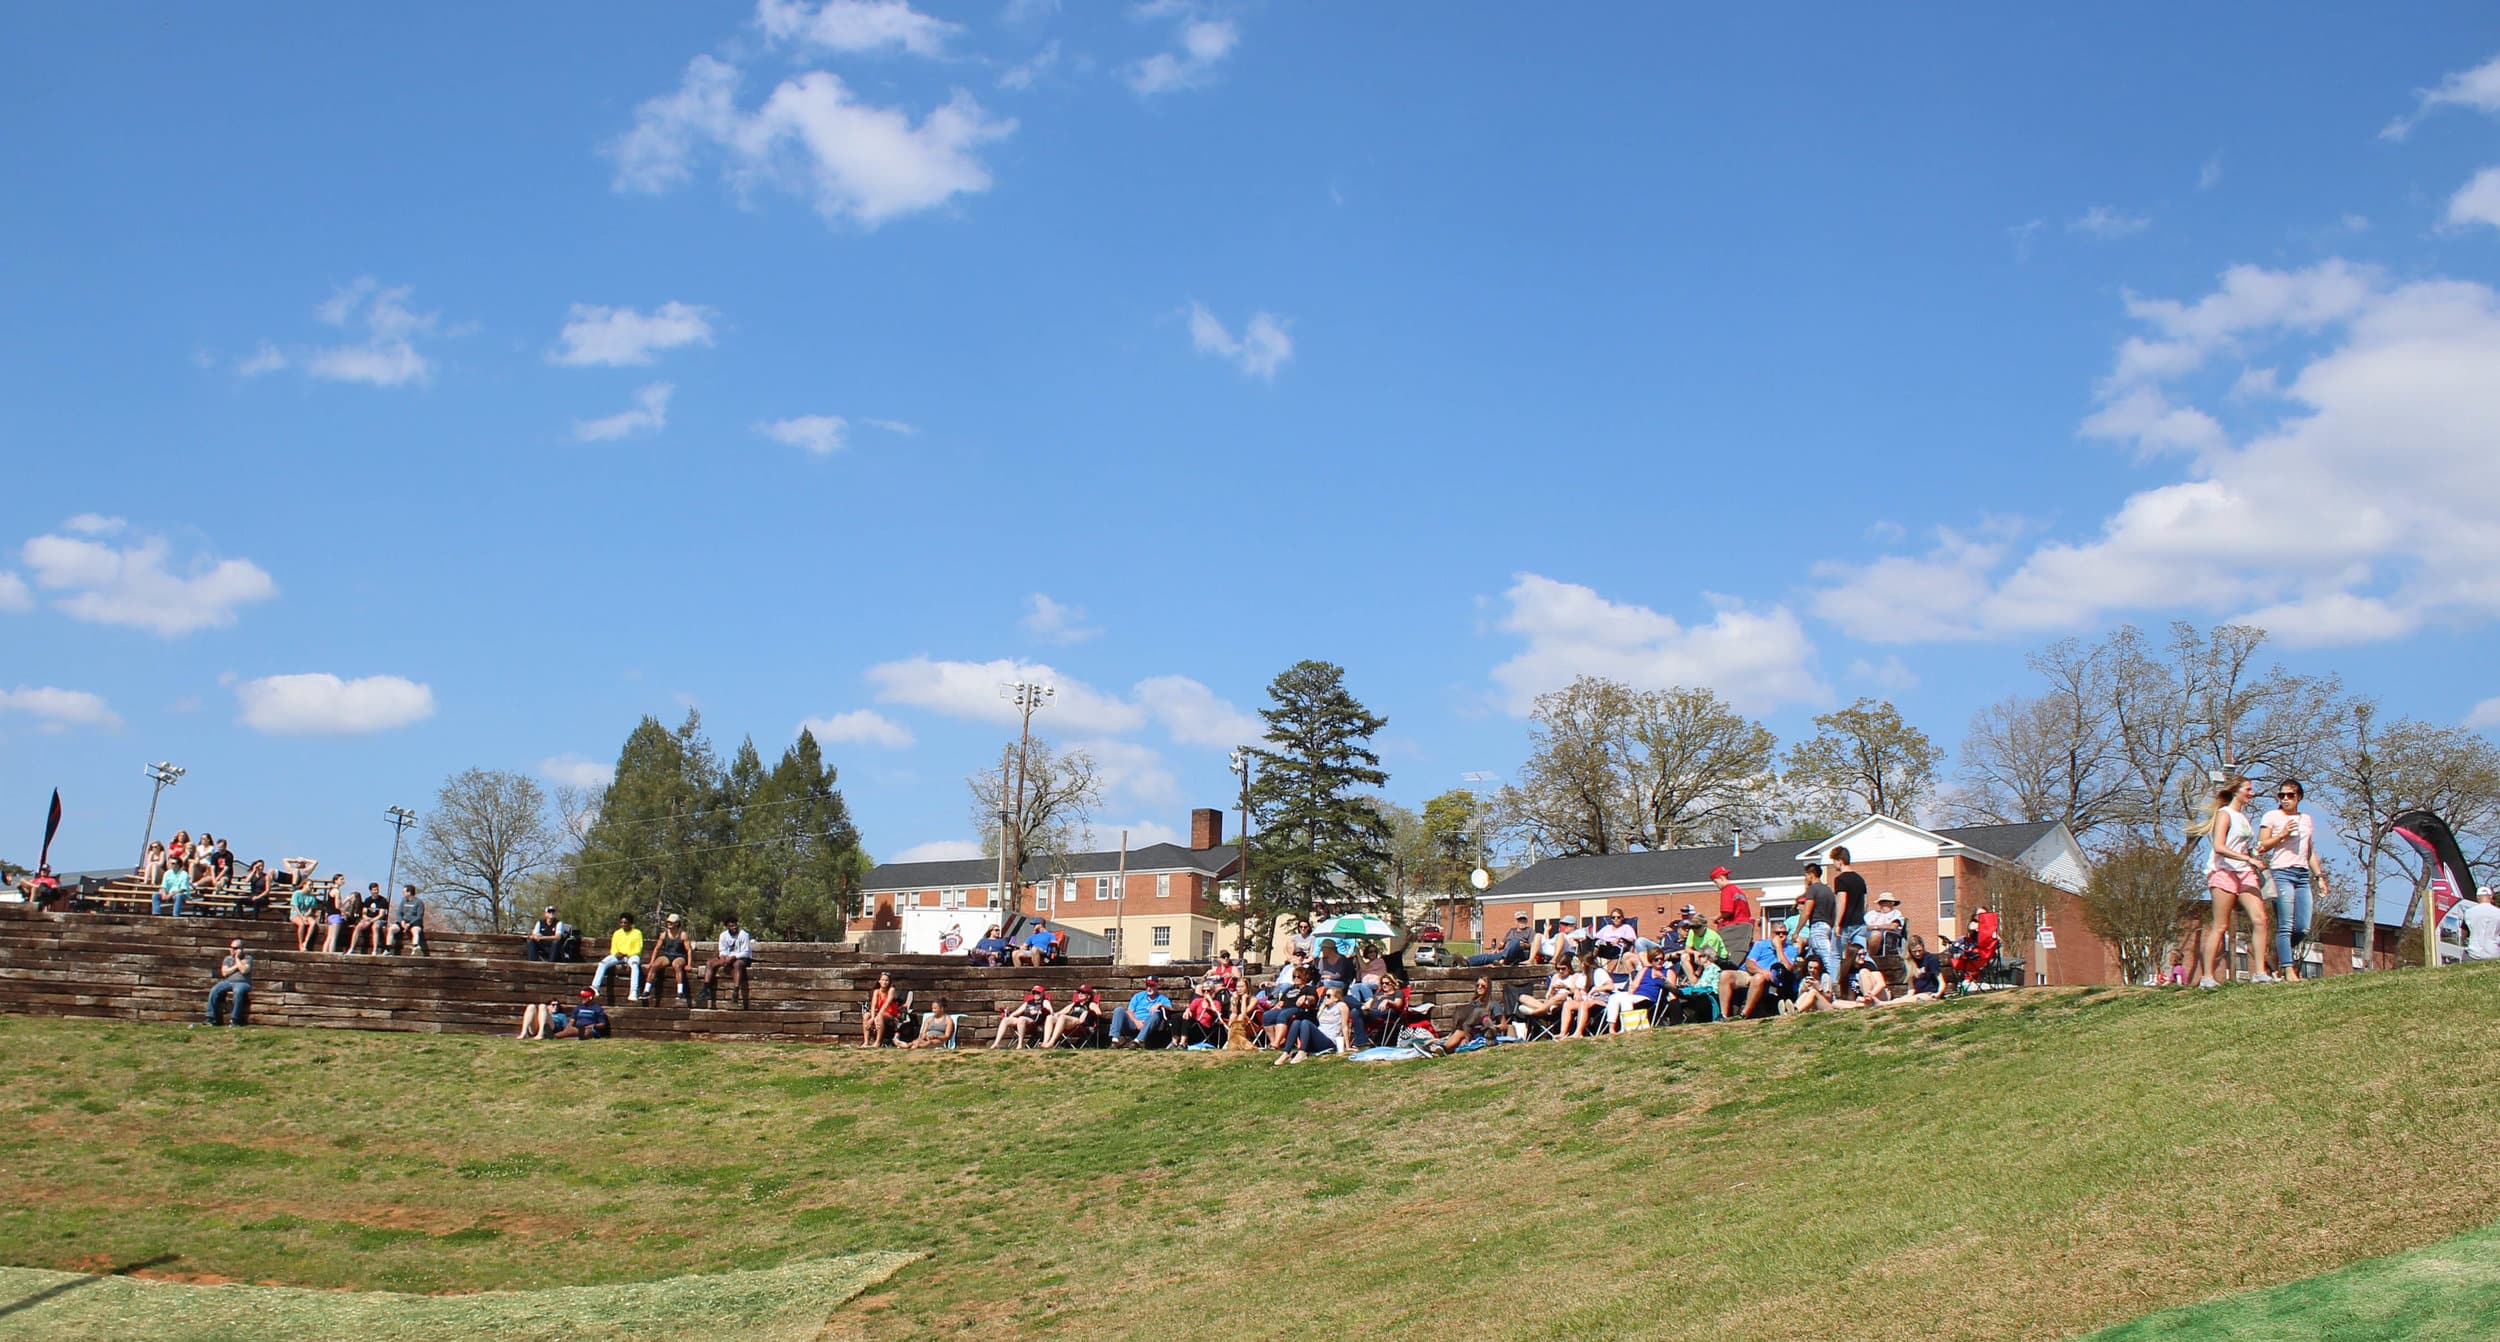 Many students took advantage of the nice weather and a day of no classes to watch the Crusaders play.